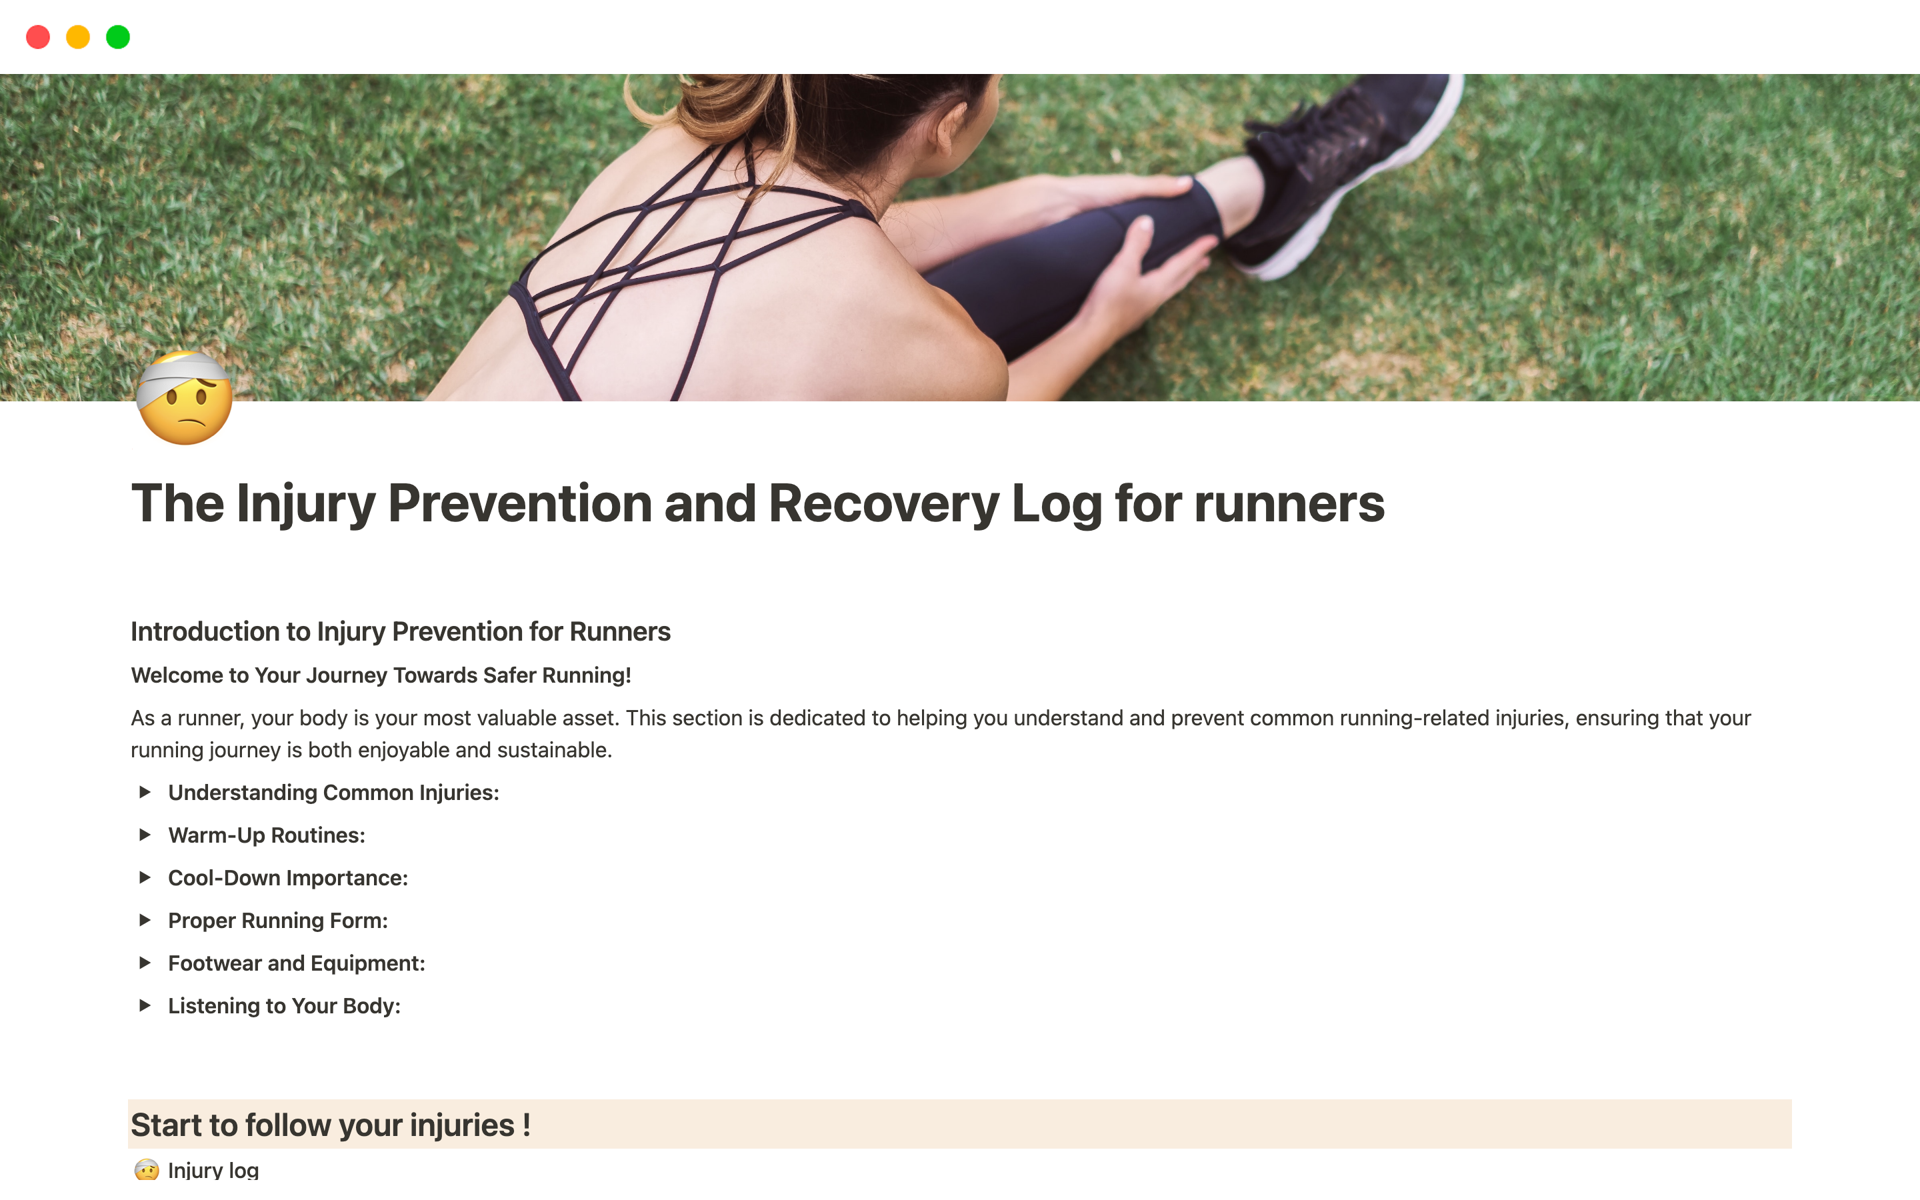 The Injury Prevention and Recovery Log for runners님의 템플릿 미리보기